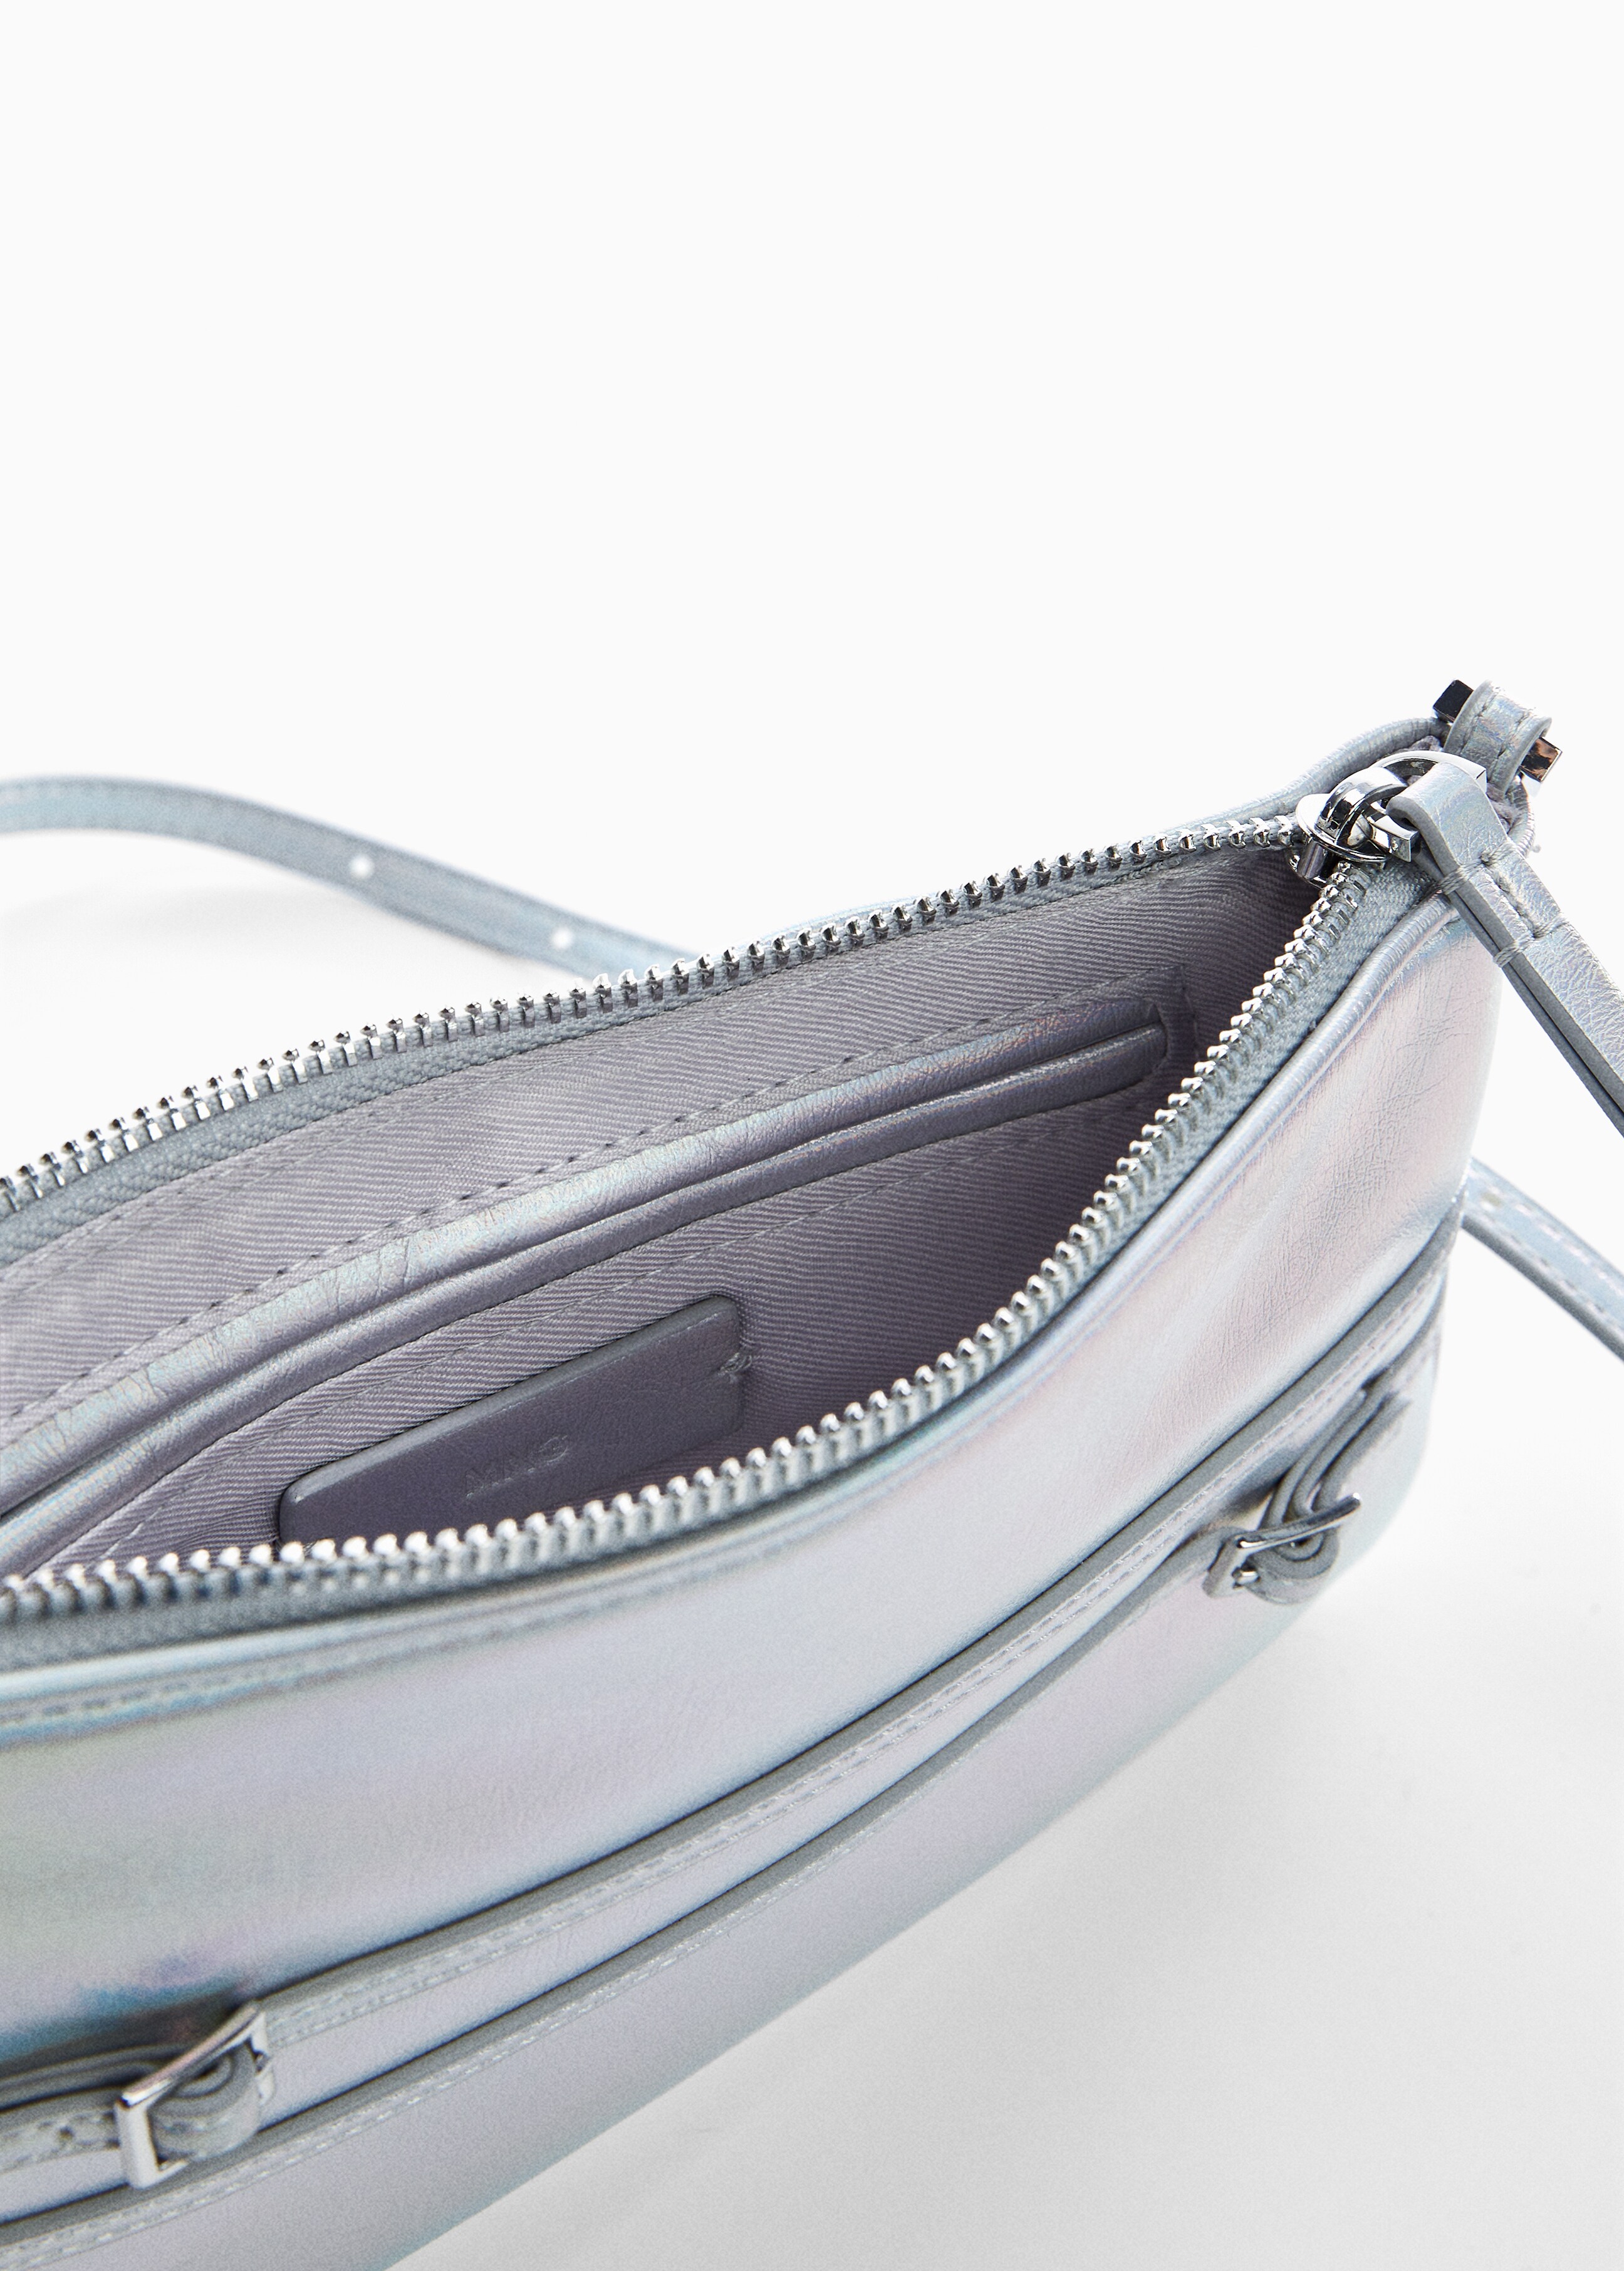 Metallic bag with buckles - Details of the article 2